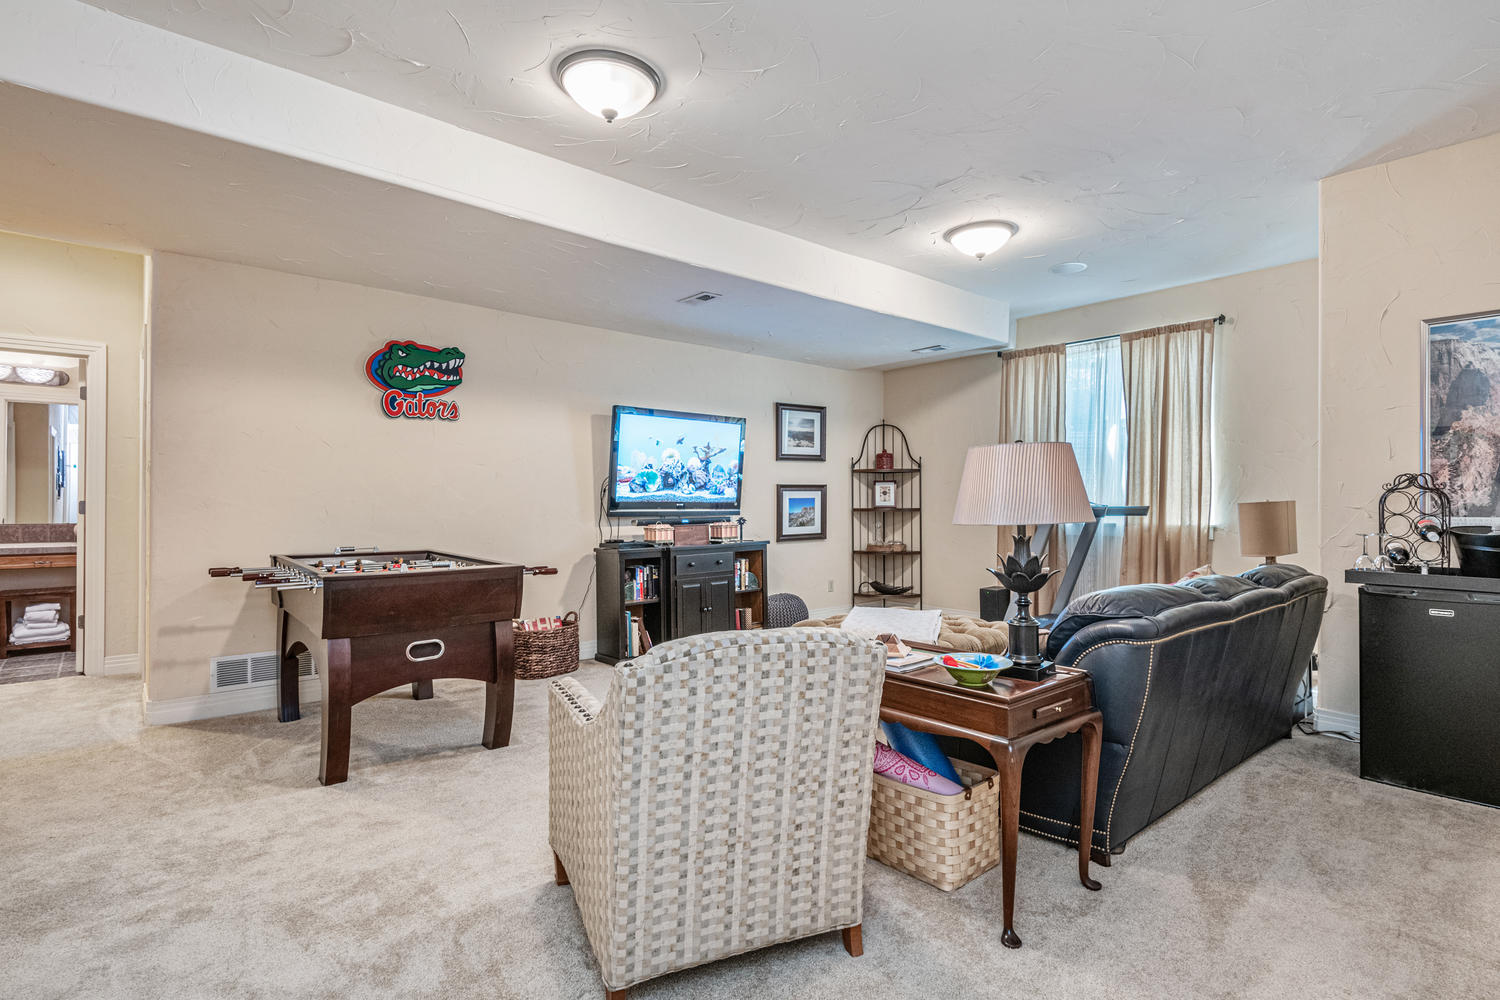 Great Recreation Room Adds to Living Space